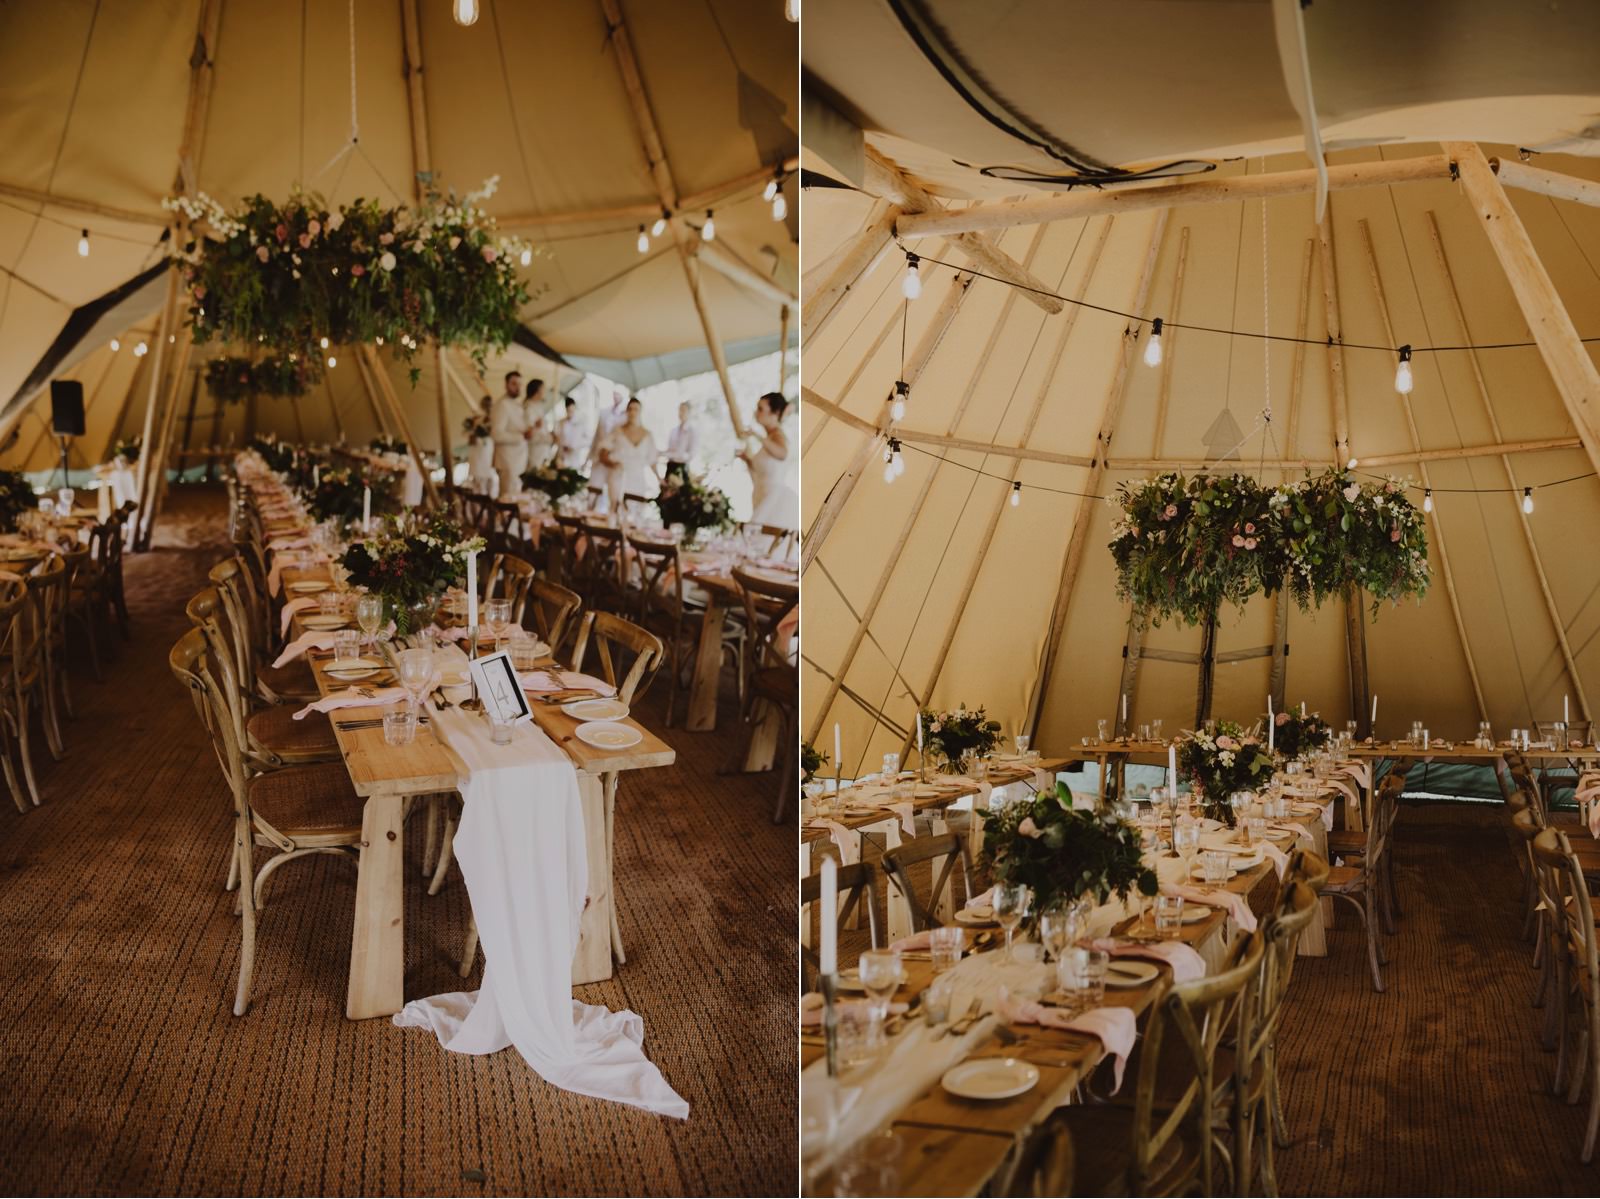 photo inside the tipi of decorations